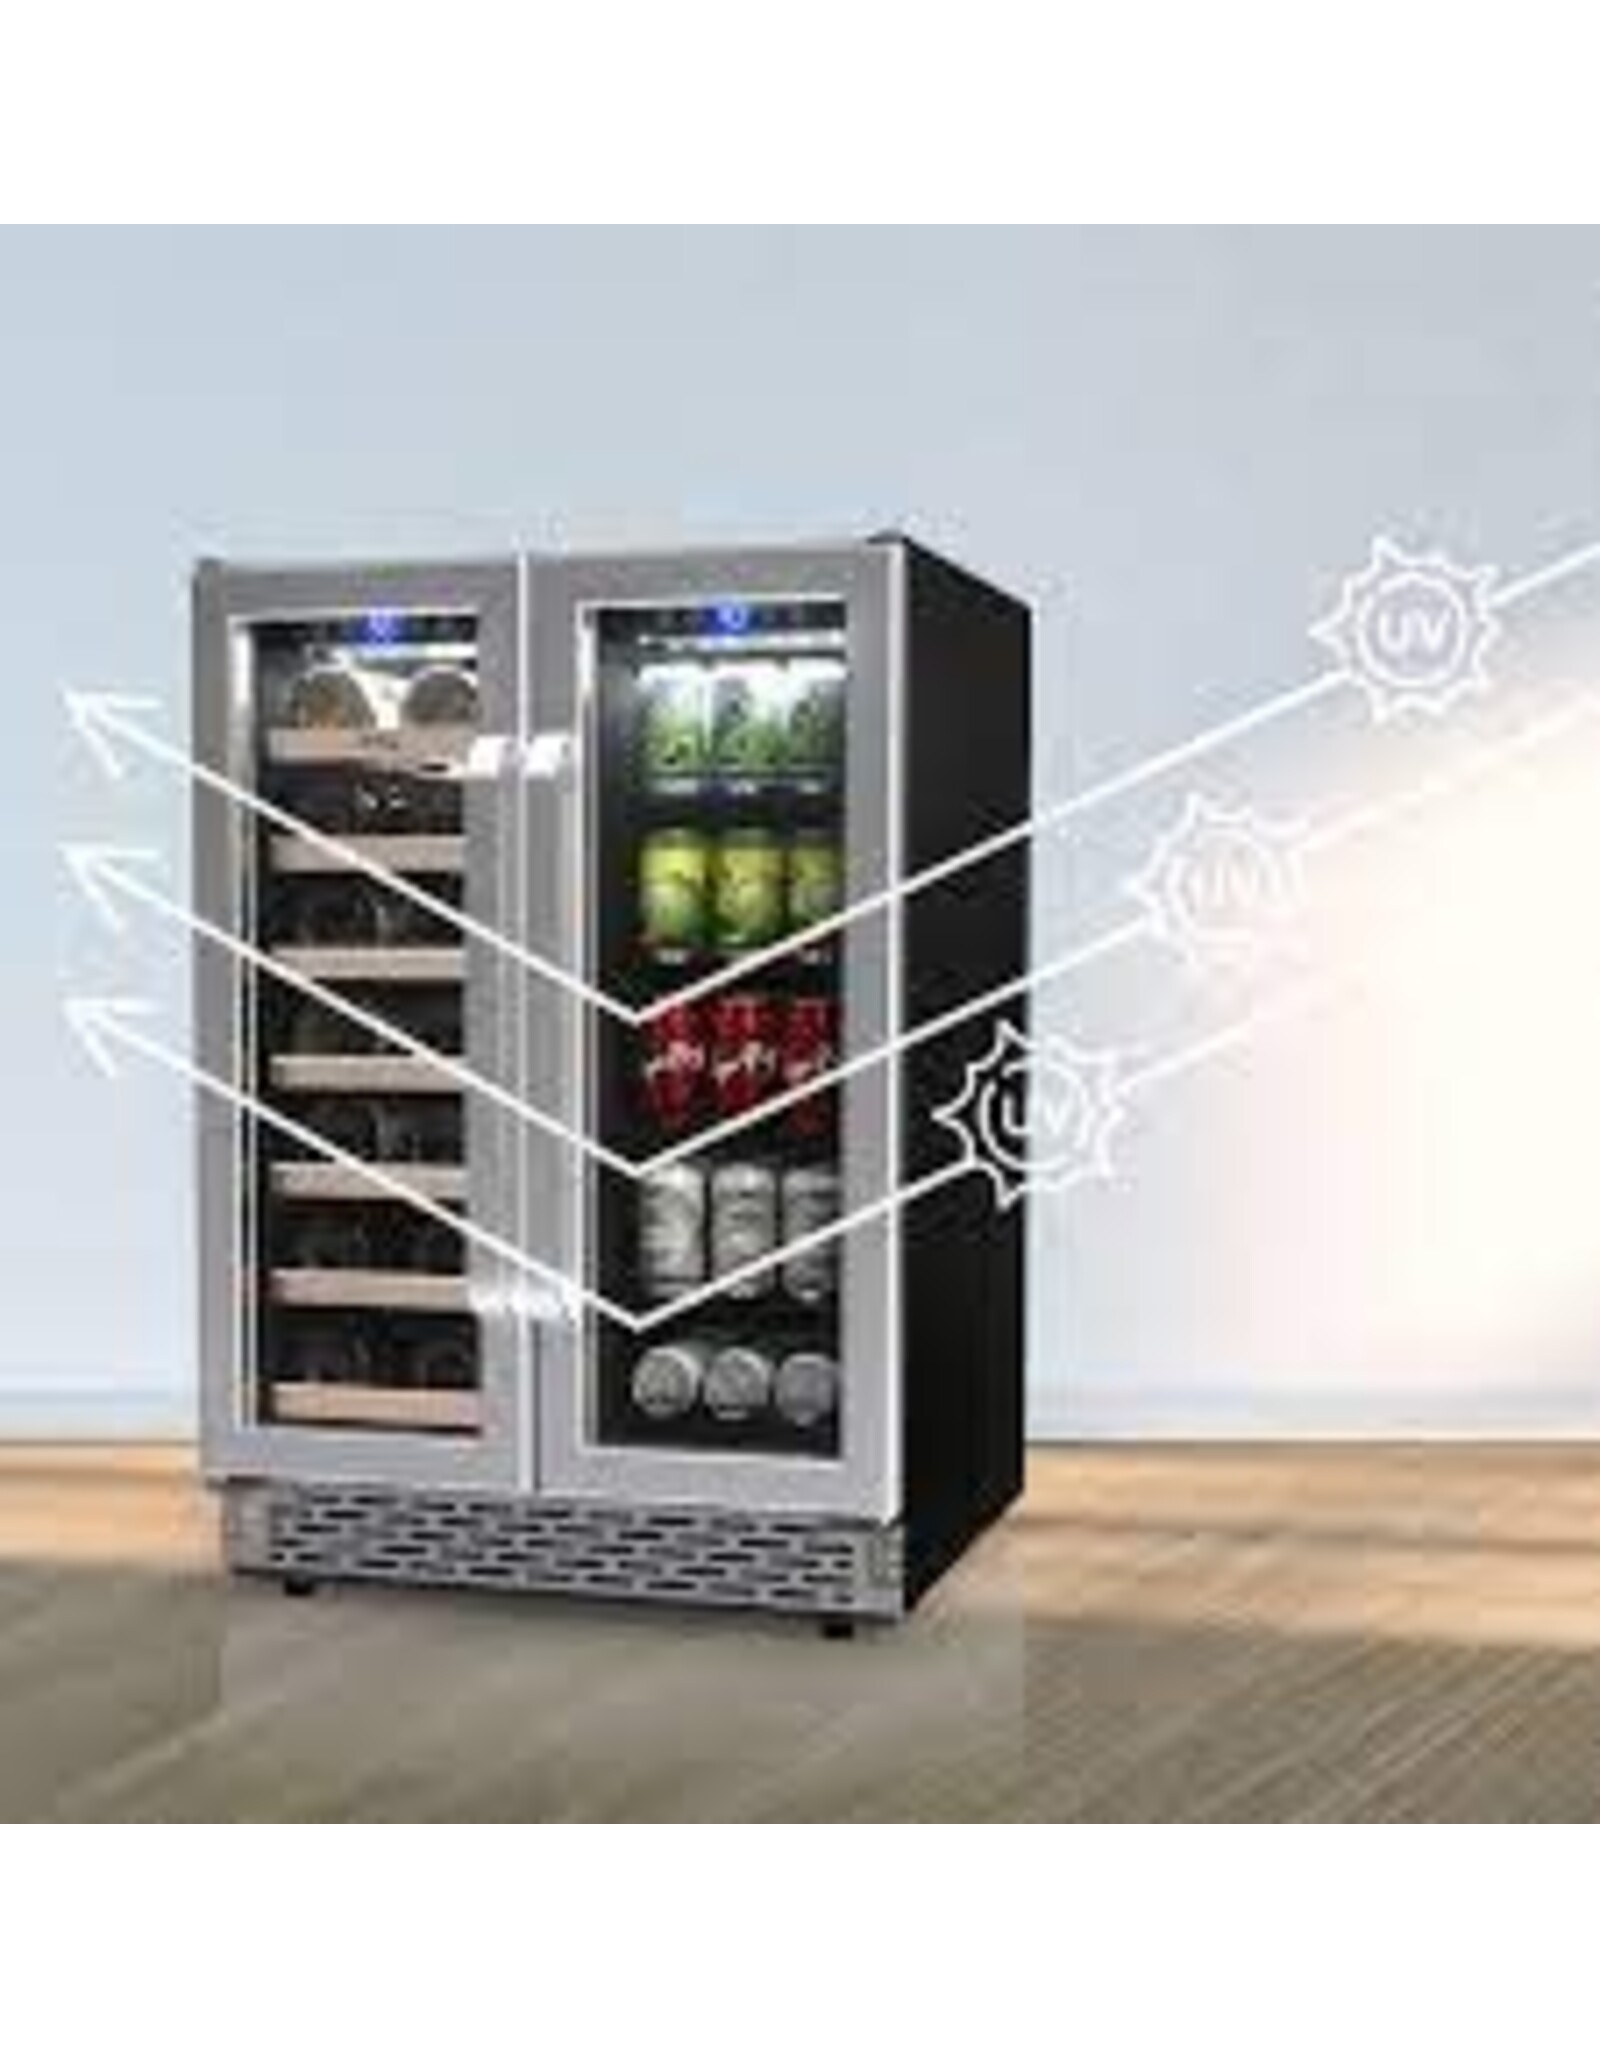 TLC TCL 23.4-in W Stainless Steel Dual Zone Cooling Built-In /freestanding Indoor Wine Cooler